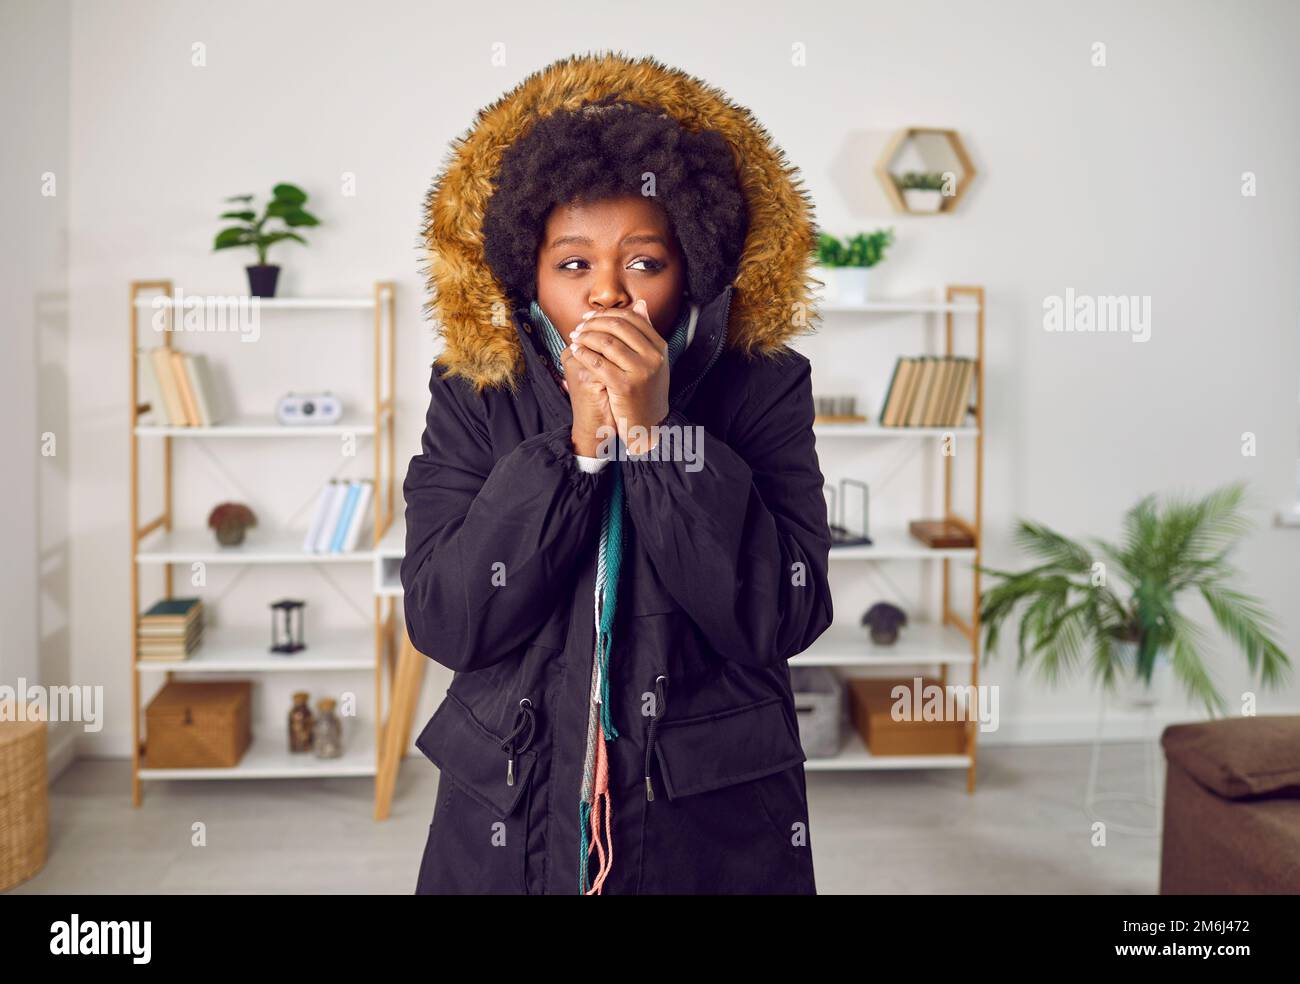 African American woman freezing and wearing warm clothes indoors during a cold winter Stock Photo